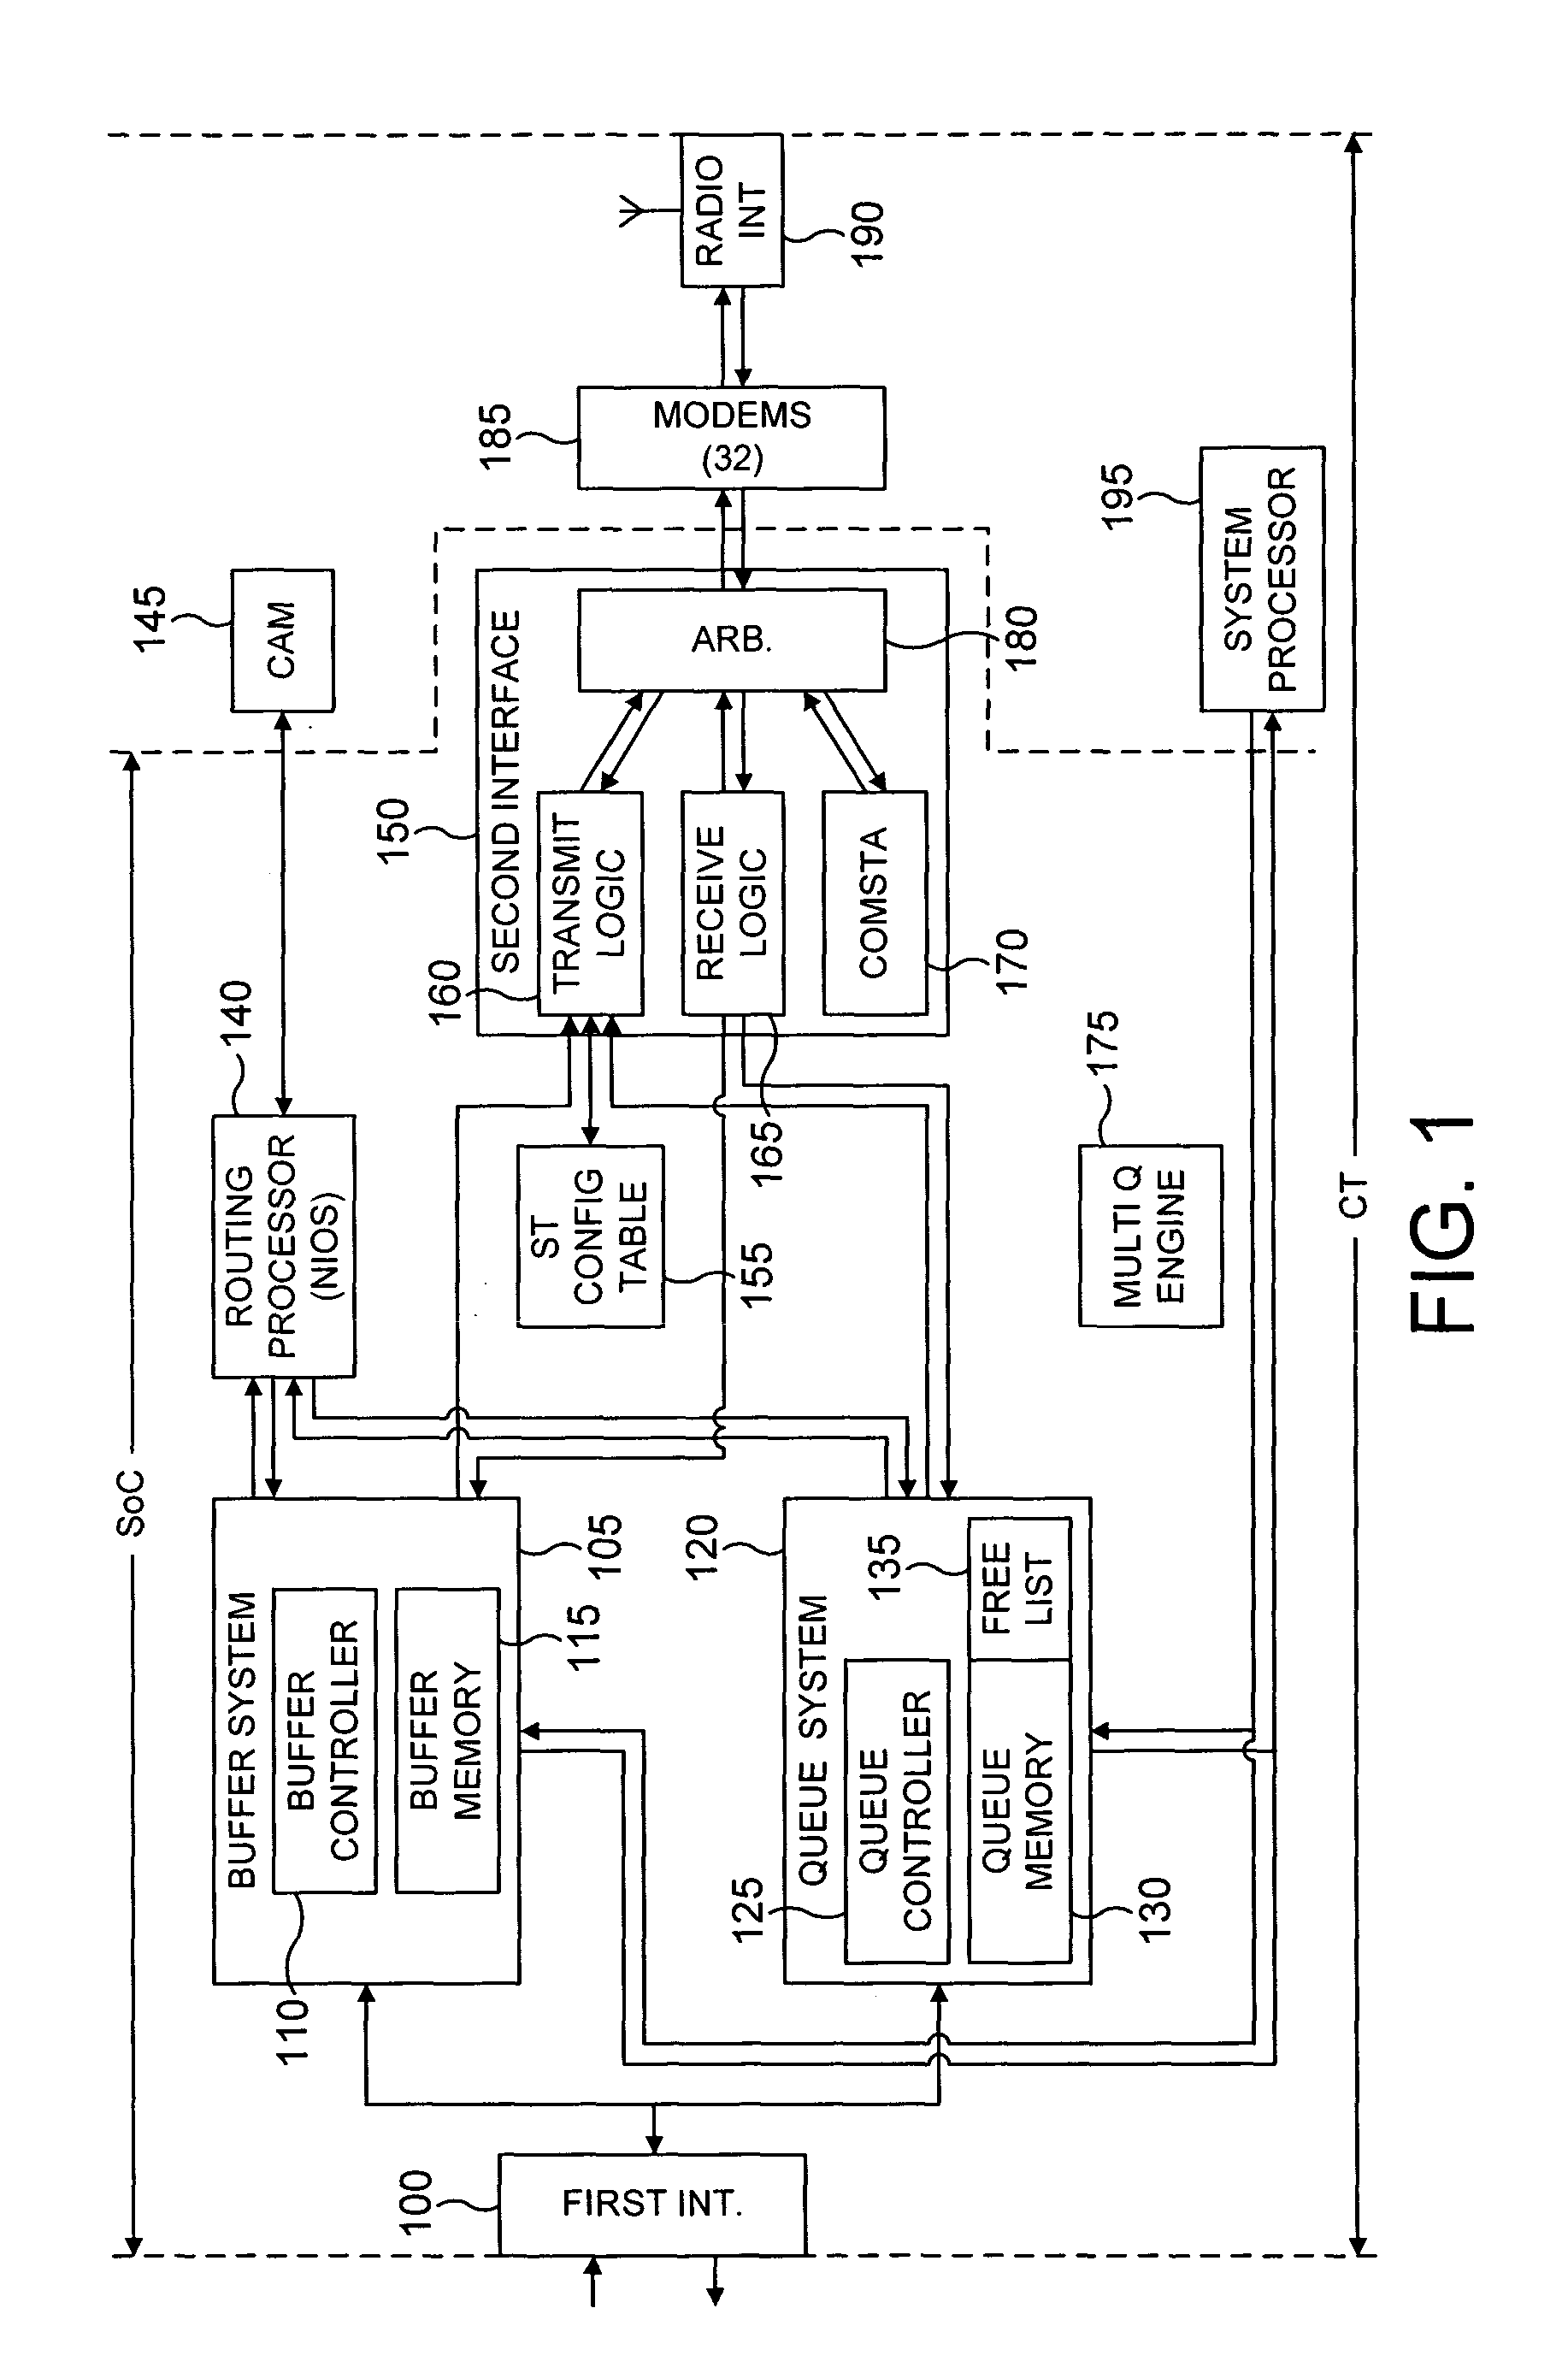 System and method for data routing